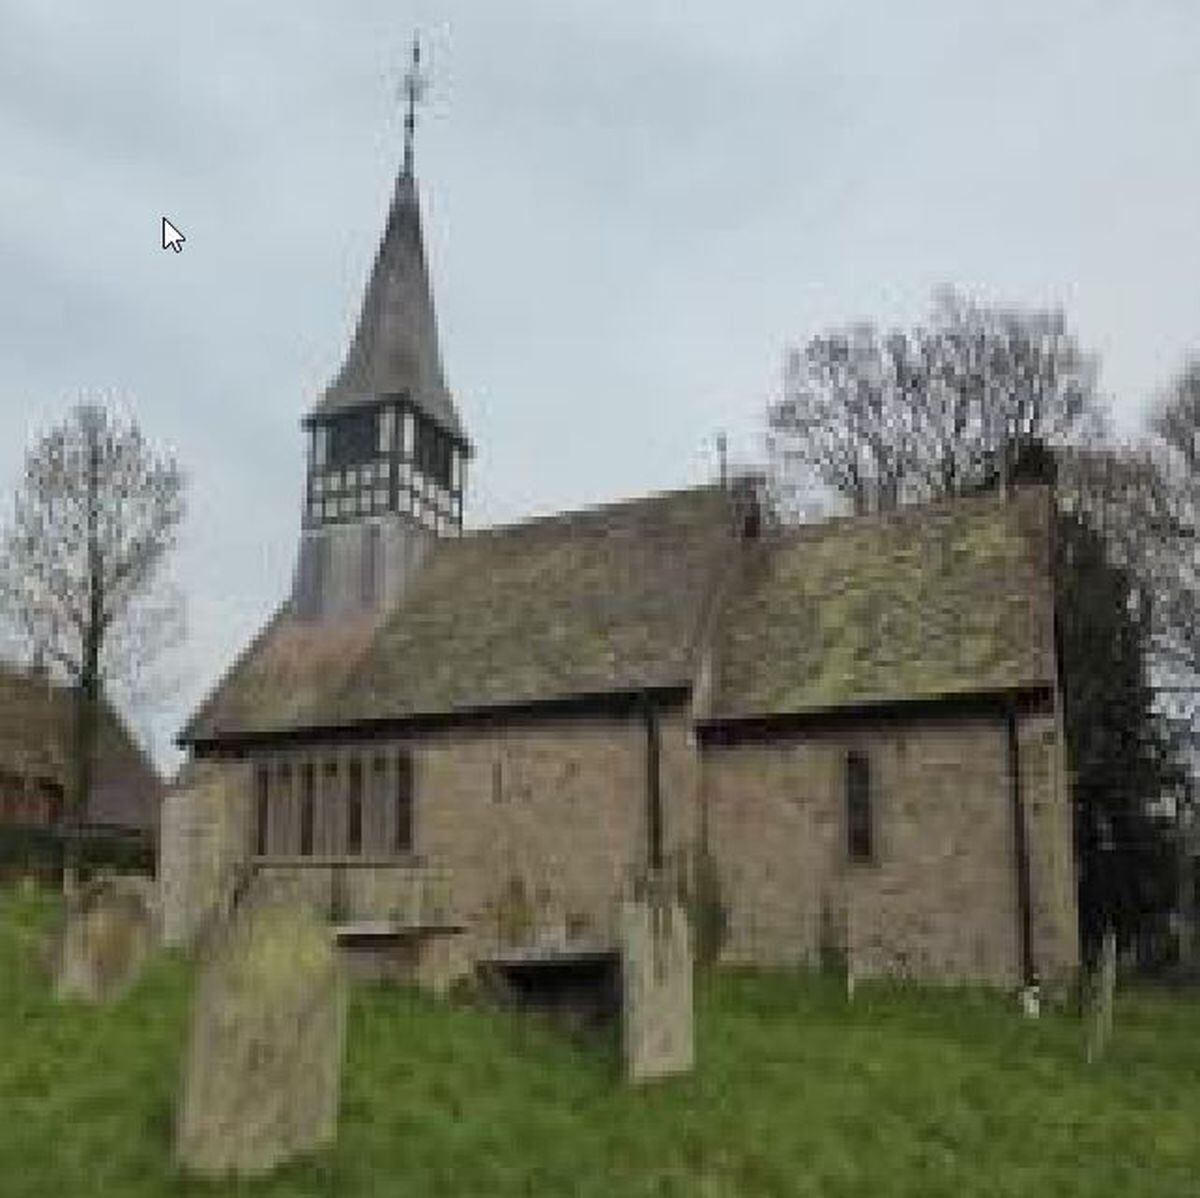 The Church of St Mary, Bedstone, a new addition to the at risk register